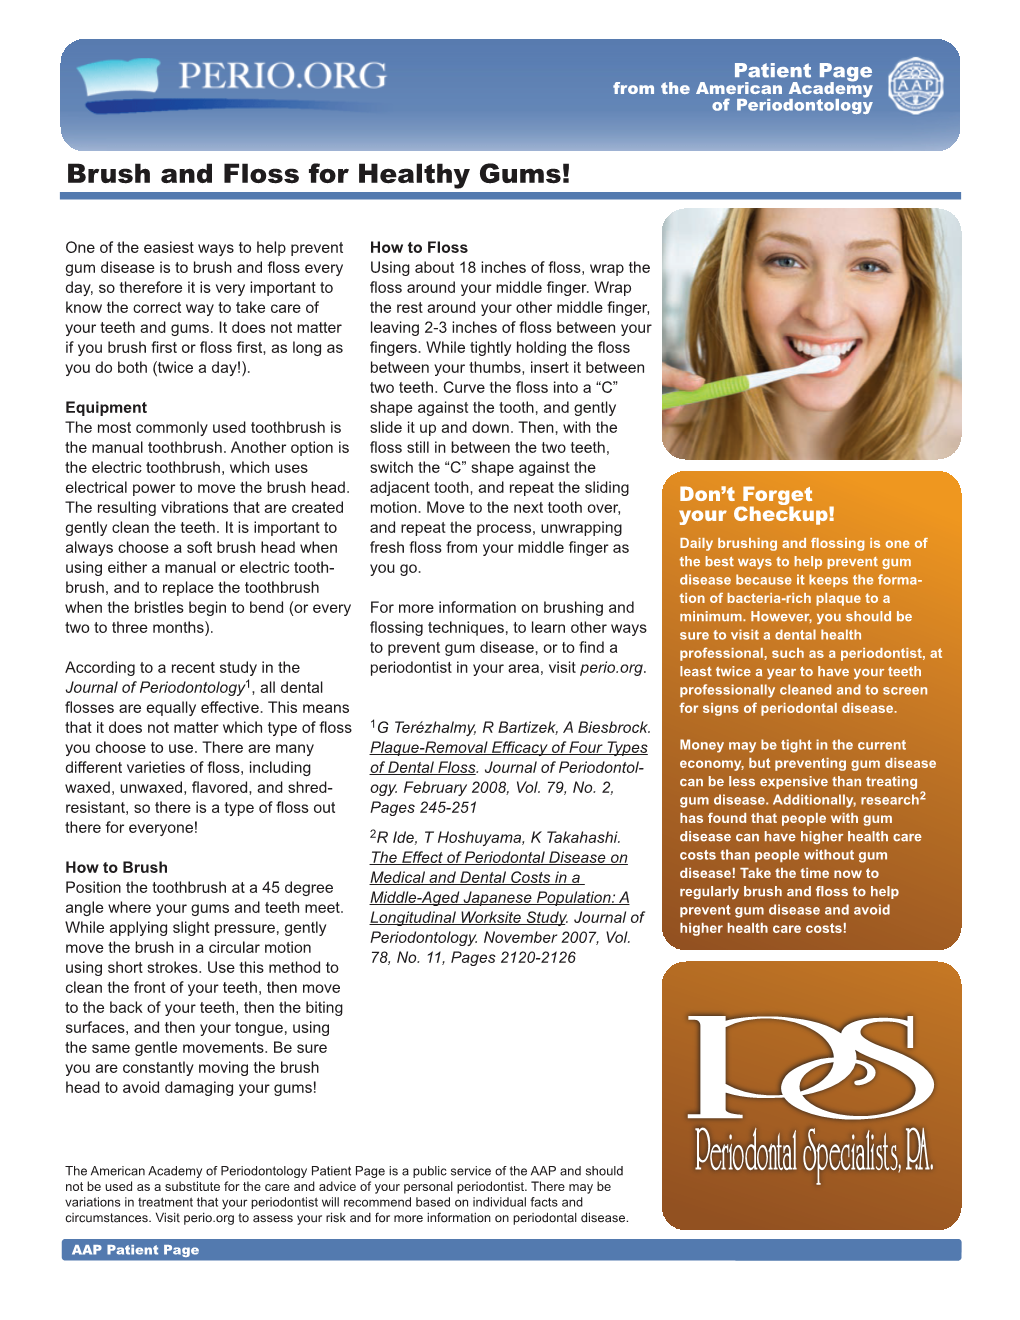 Brush and Floss for Healthy Gums!